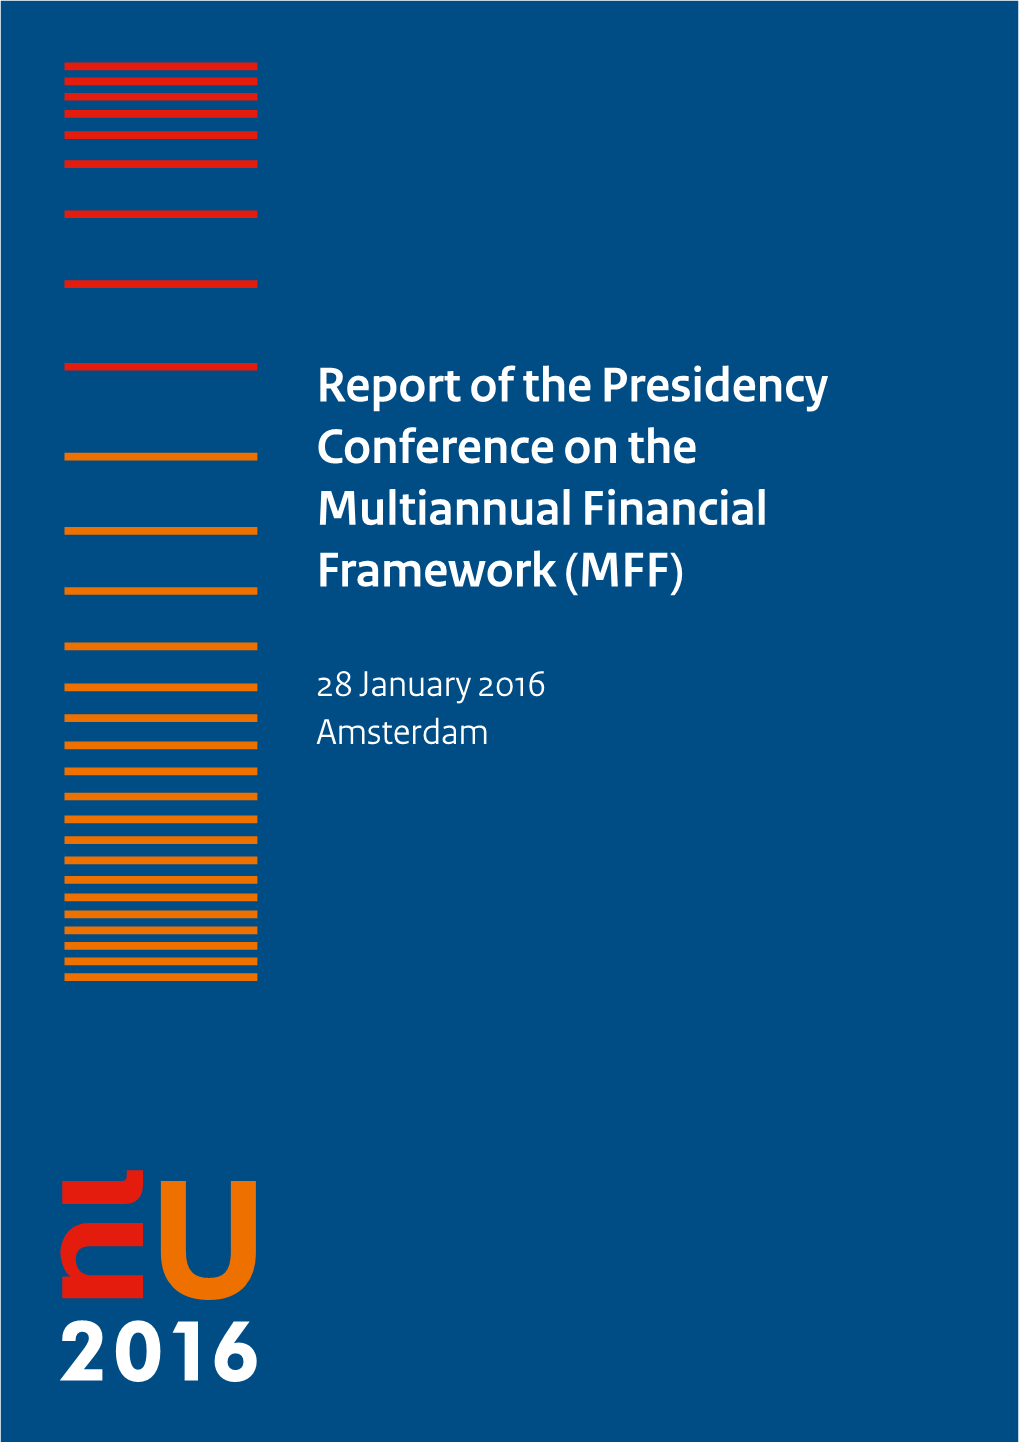 Report of the Presidency Conference on the Multiannual Financial Framework (MFF)